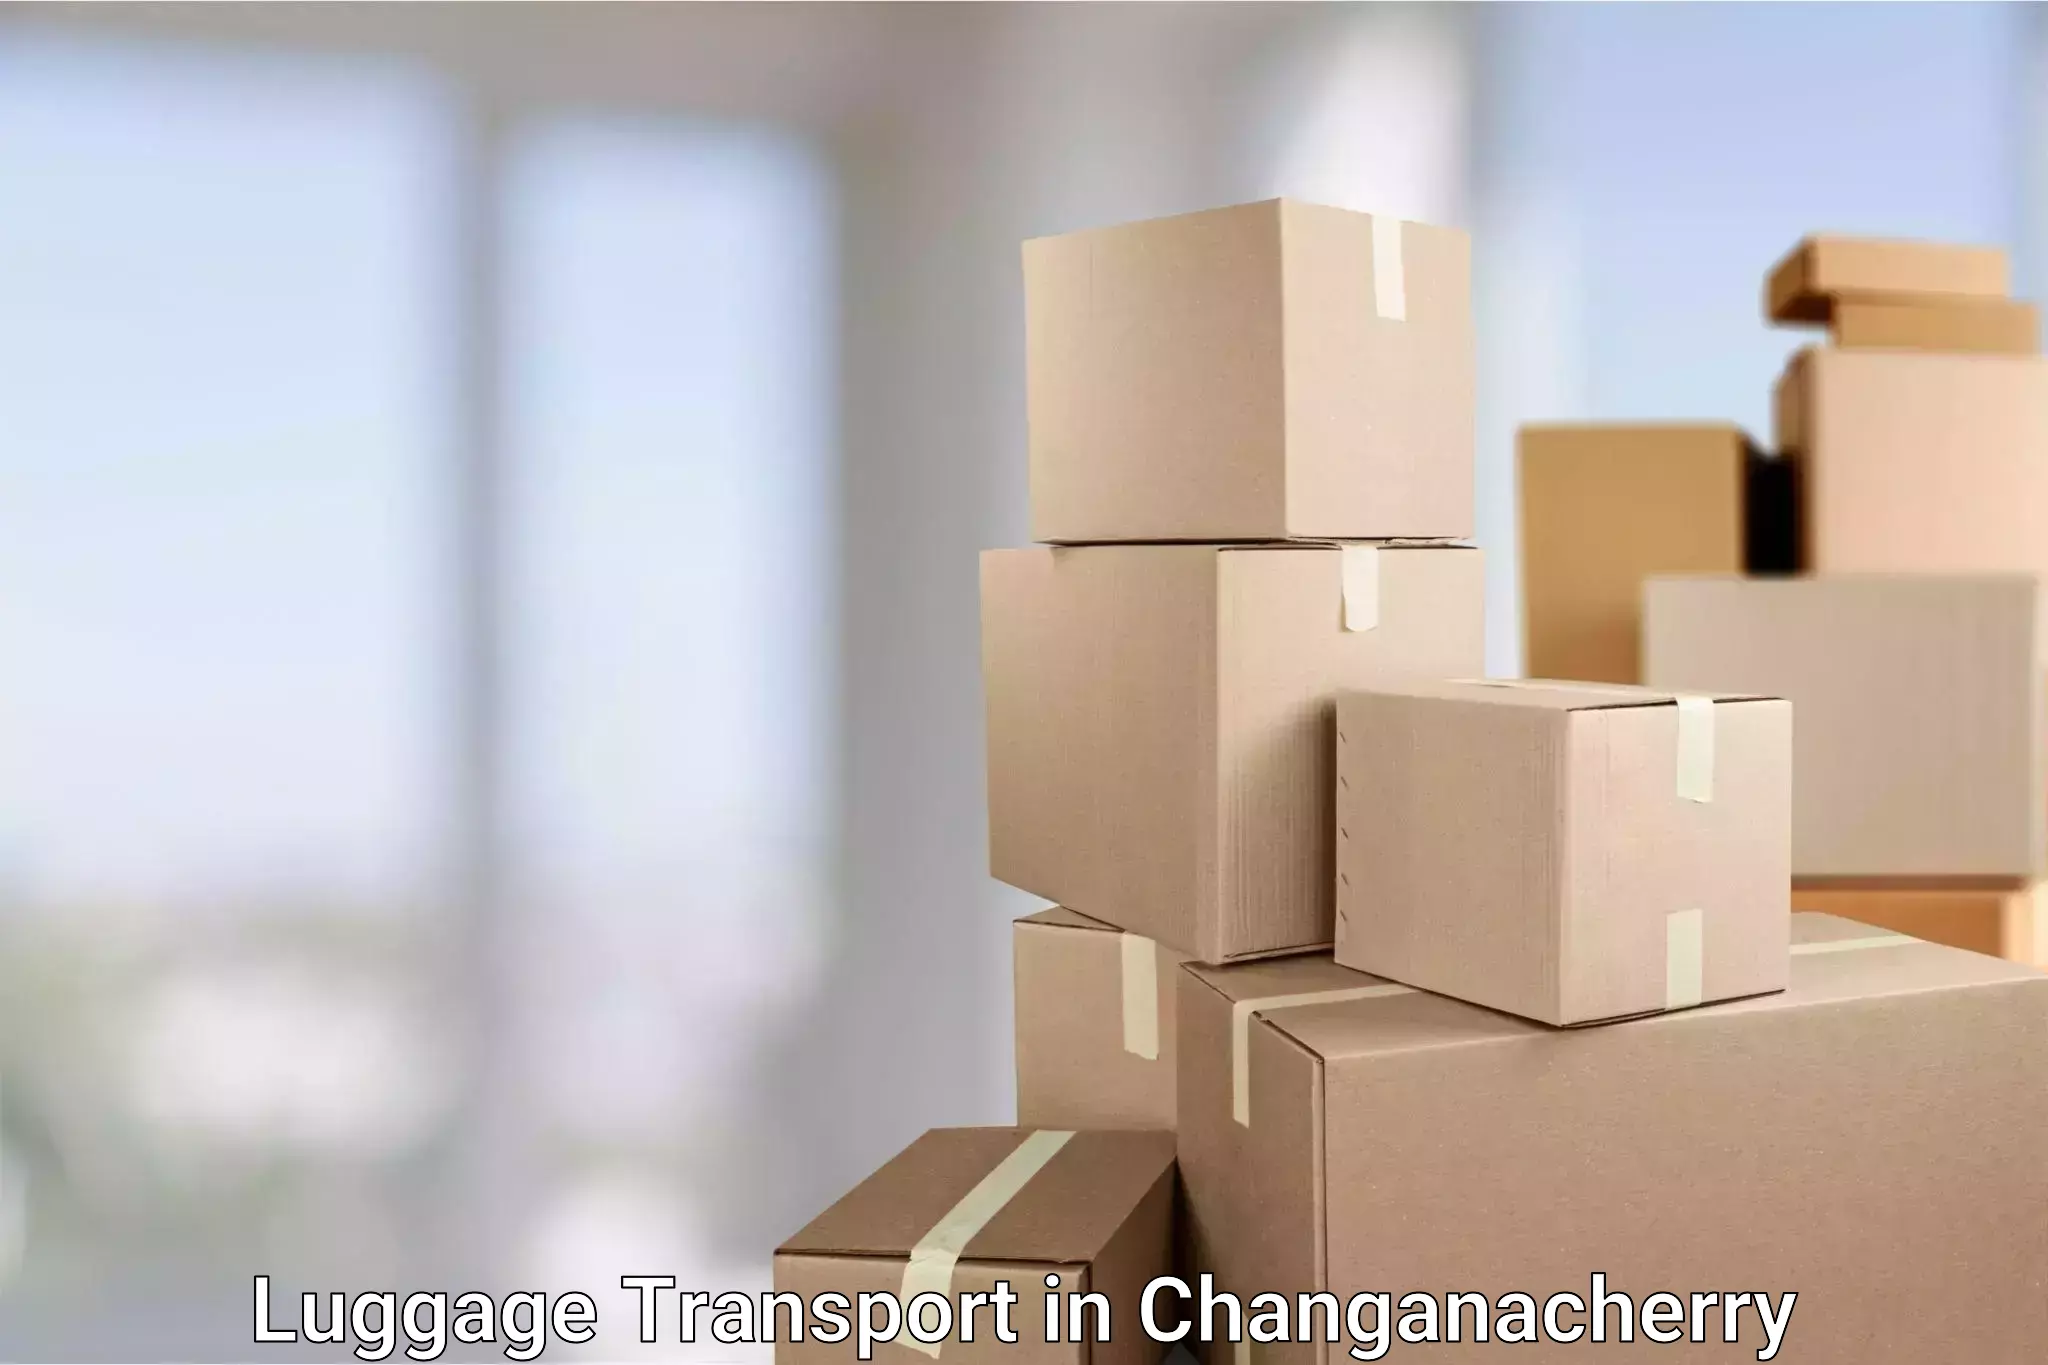 Holiday season luggage delivery in Changanacherry